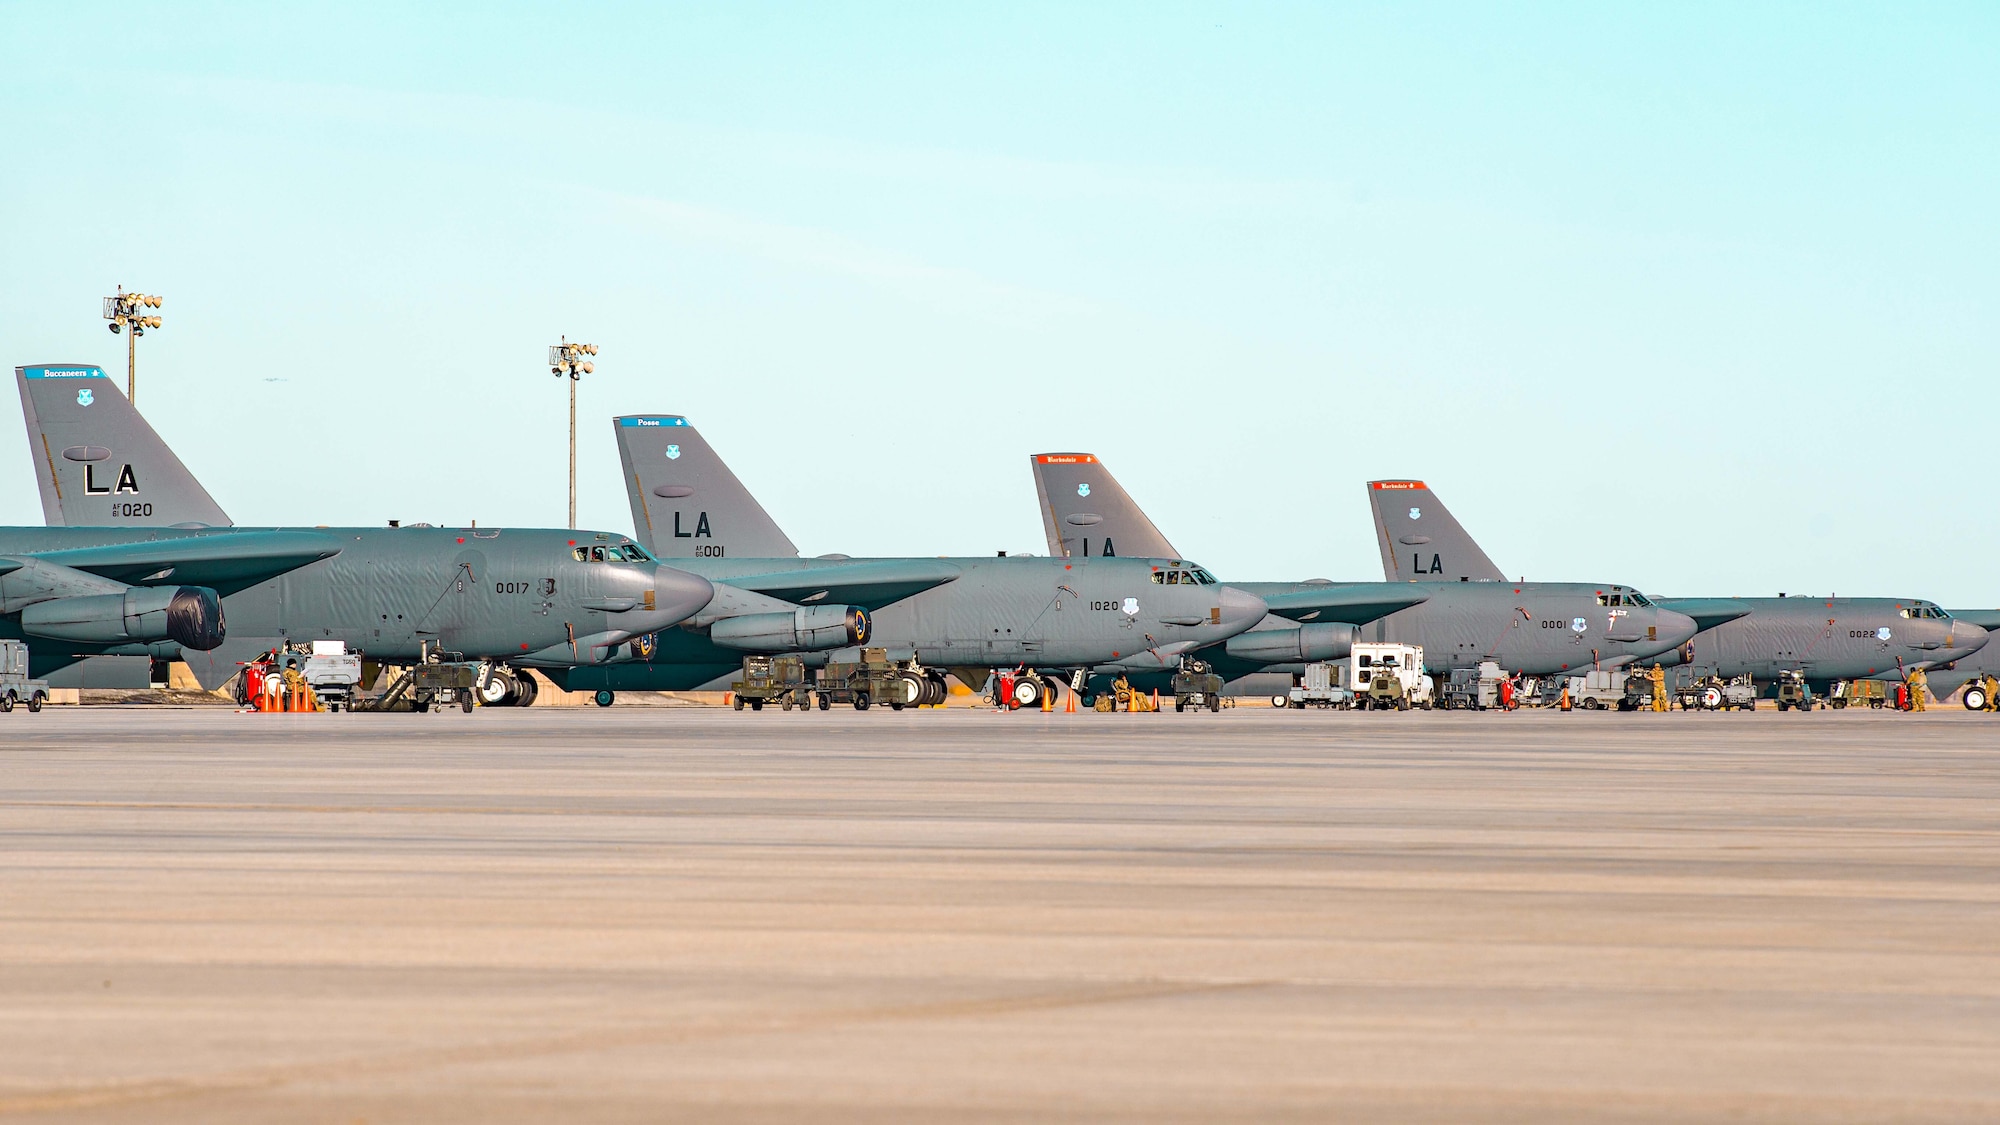 U.S. Air Force B-52H Stratofortresses assigned to the 2nd Bomb Wing from Barksdale Air Force Base, Louisiana, sit on the flightline during Global Thunder 23 (GT23) at Minot AFB, North Dakota, April 11, 2023. GT23 is an invaluable training opportunity to exercise all U.S. Strategic Command mission areas and create the conditions for strategic deterrence against a variety of threats. (U.S. Air Force photo by Staff Sgt. Michael A. Richmond)